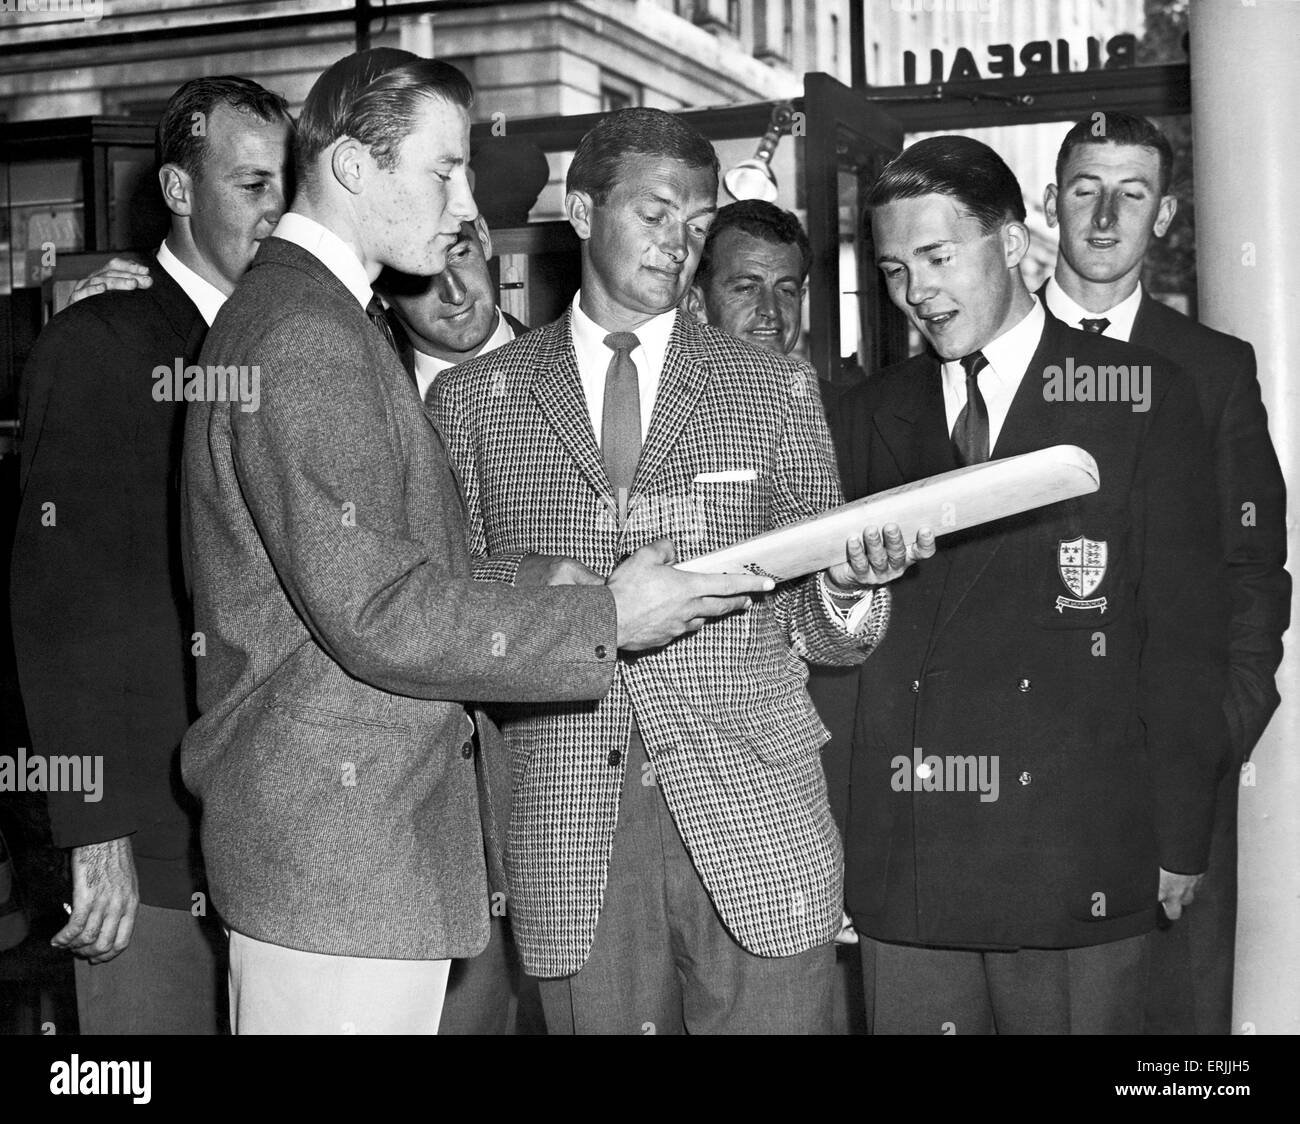 Australian cricket tour of England for the Ashes. Two Birmingham schoolboy cricketers meet Australian captain Richie Benaud, picture looking at a bat containing the signatures of the Aussie captain and his team. It will be one of the prizes in an Australian trade fortnight competition in Birmingham.  7th June 1961. Stock Photo